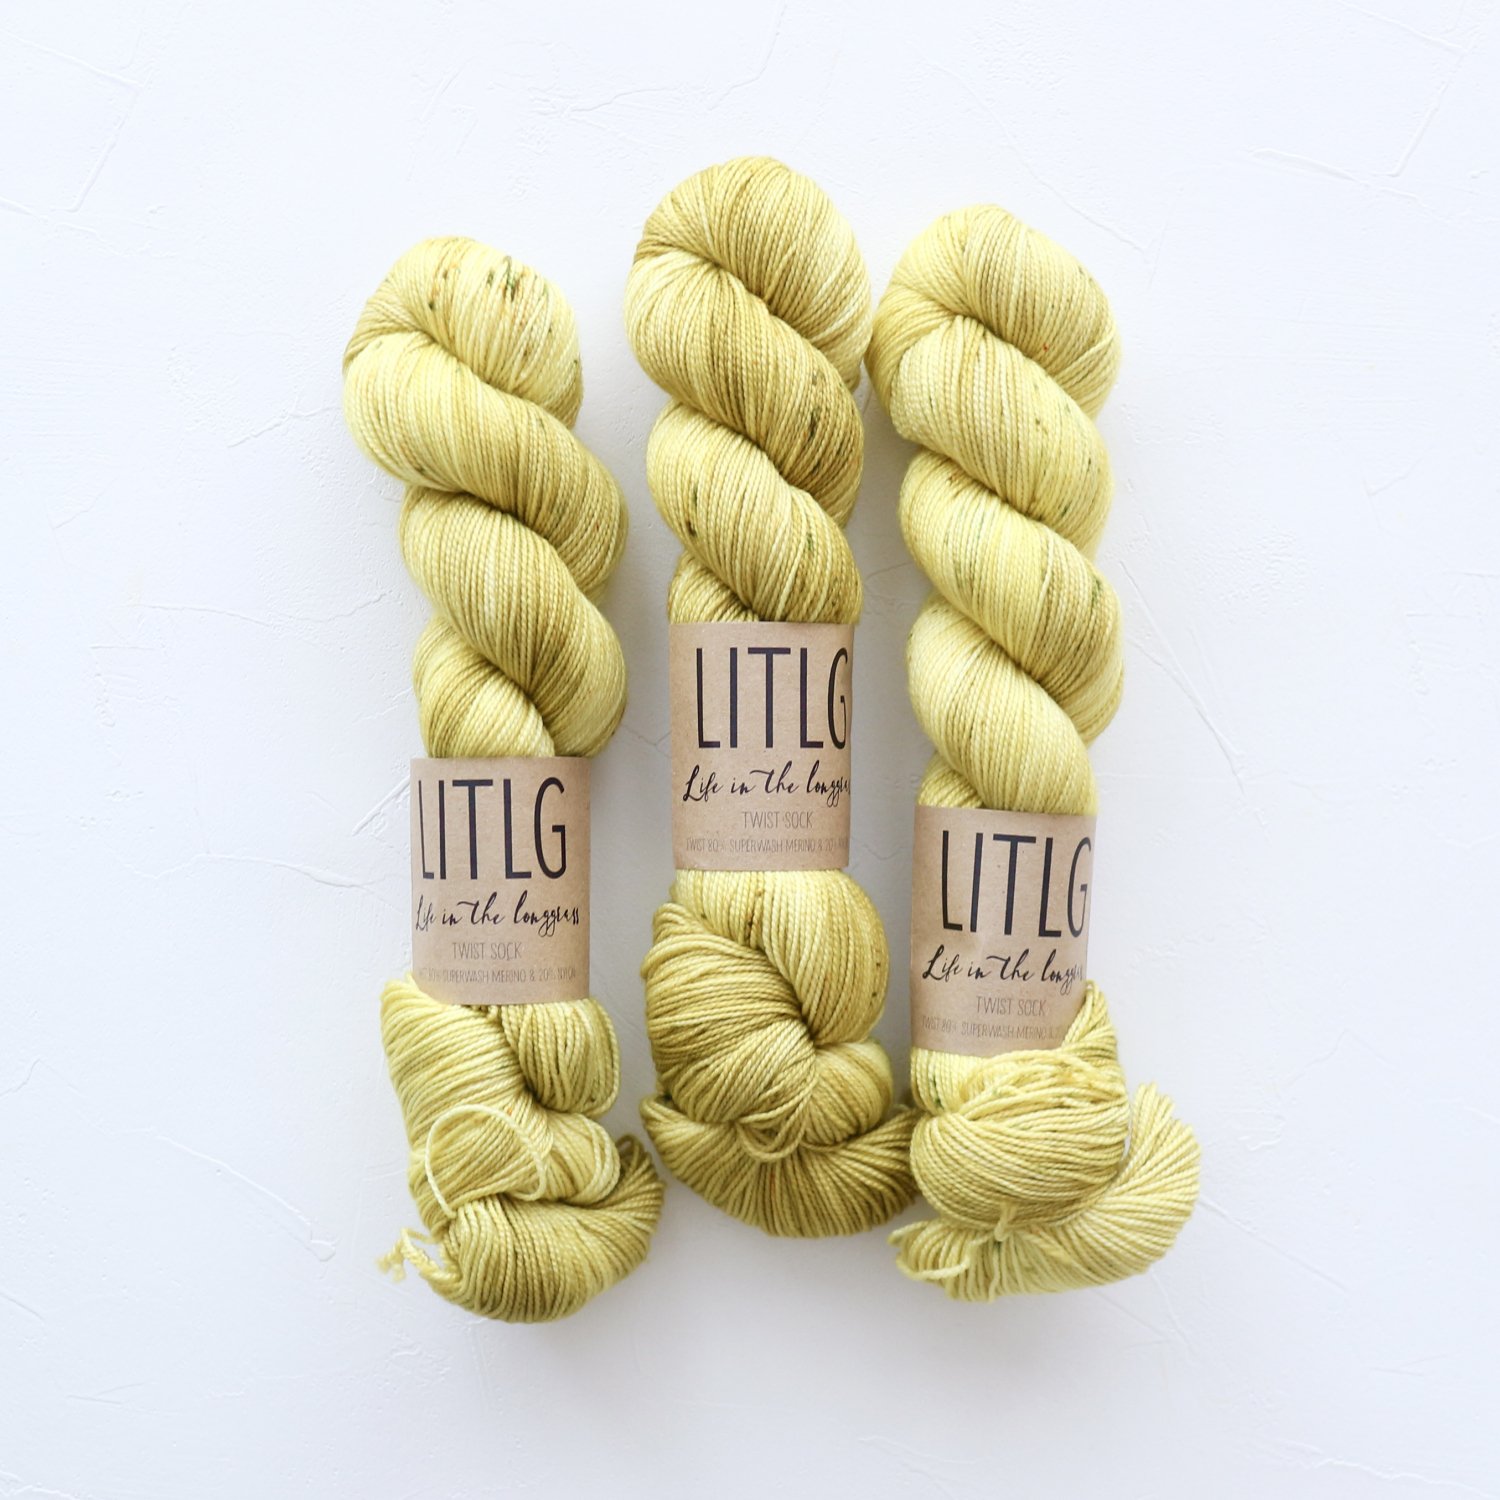 LIFE IN THE LONGGRASS<br>Twist Sock<br>Mythical